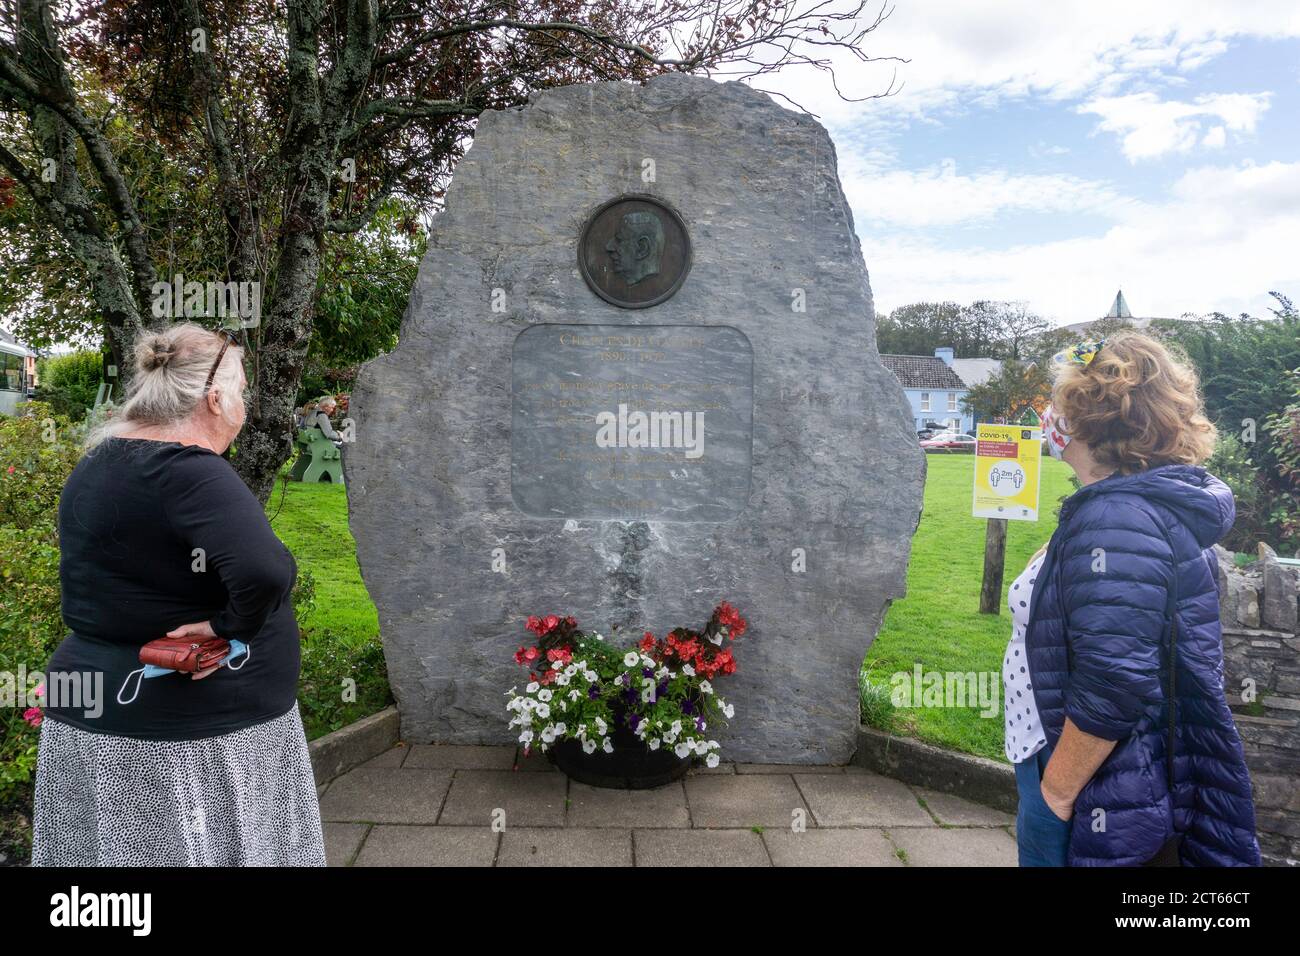 People viewing the monument in Sneem, County Kerry, Ireland which commemorates the visit of Charles DeGaulle to the area in 1969. sculptor, Alan Hall Stock Photo